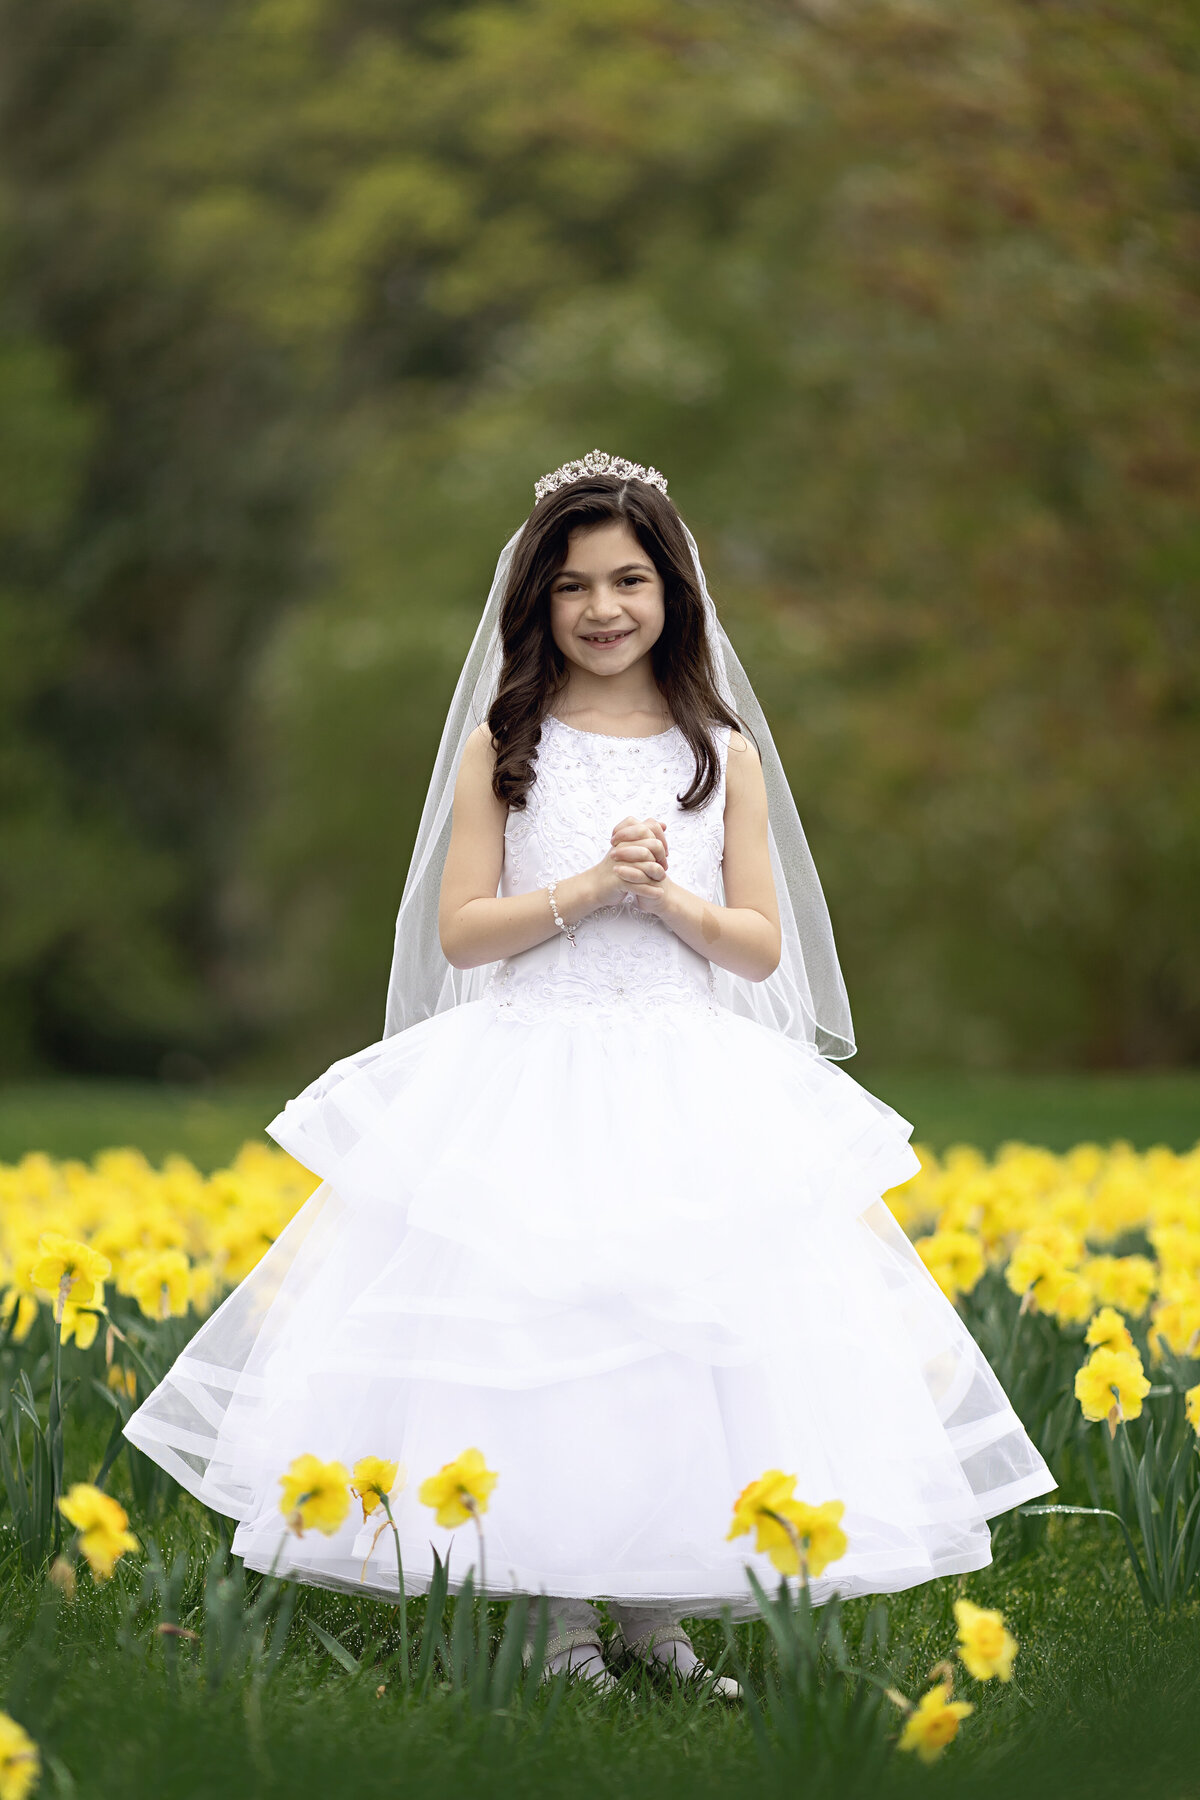 A young dark haired girl stands in a field of yellow wildflowers in a communion dress tiara and veil